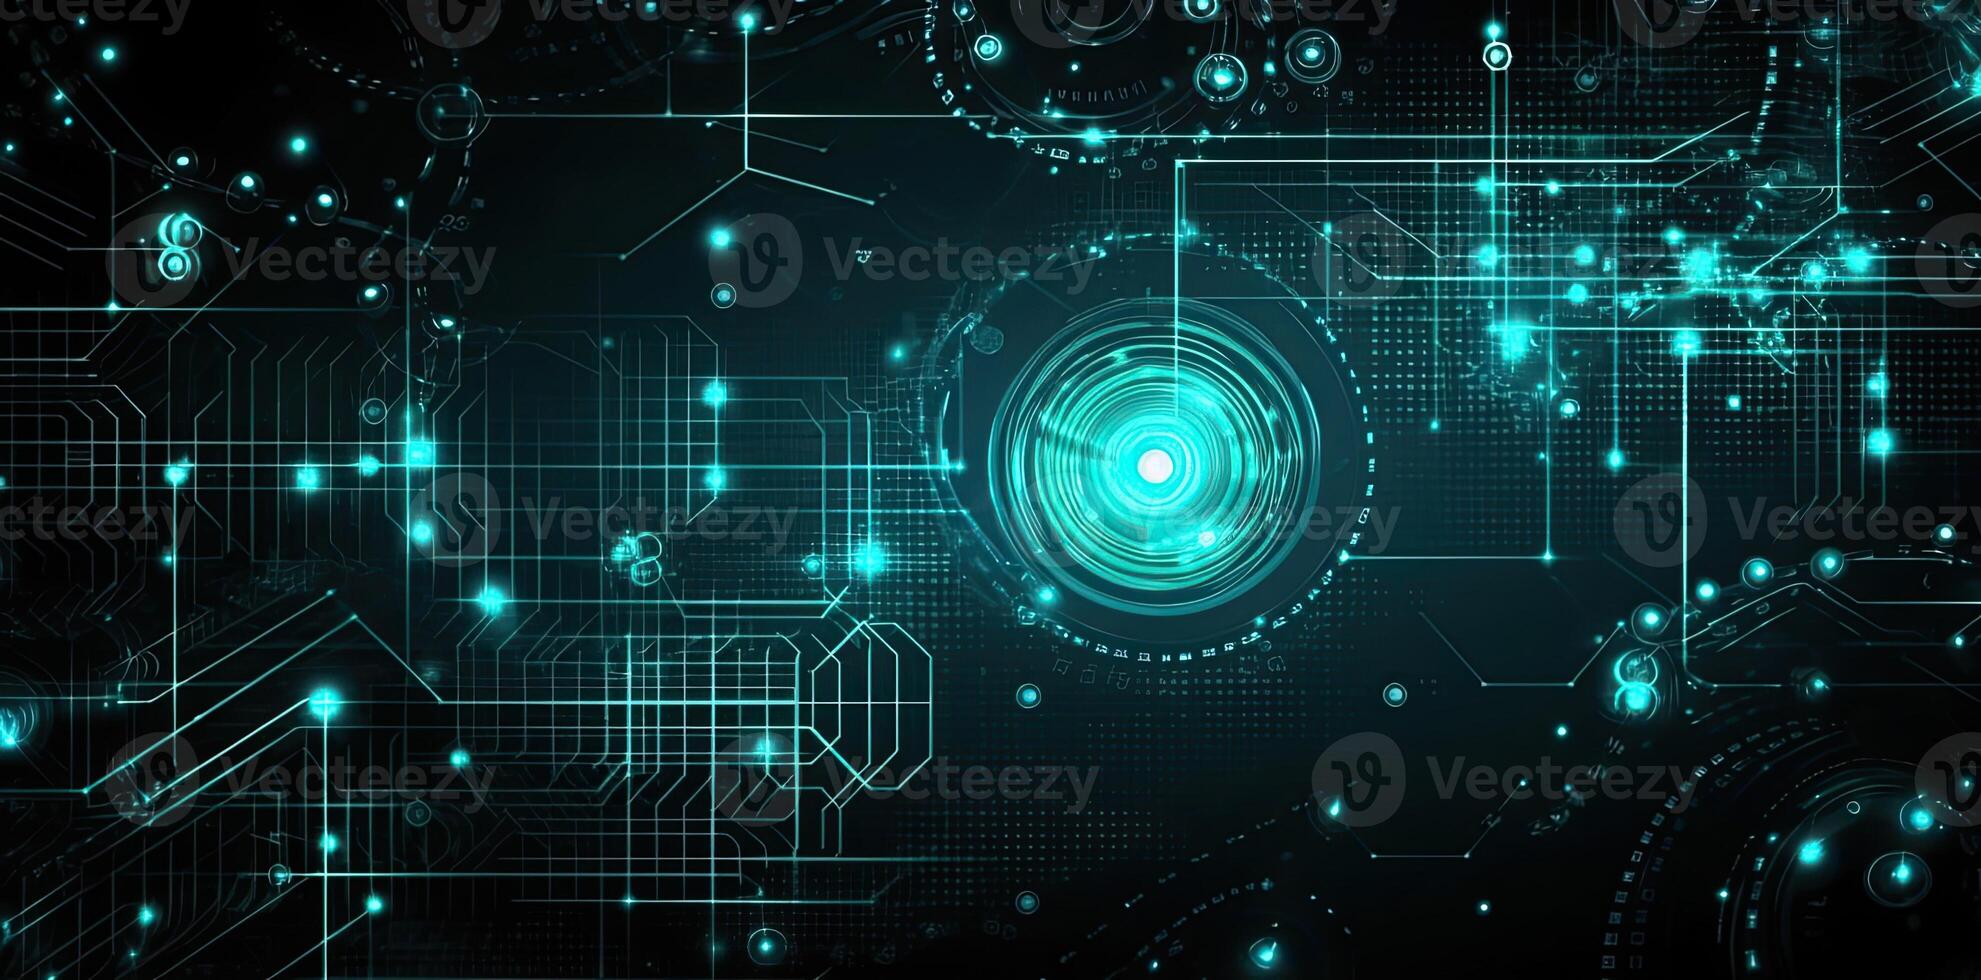 modern technology circle background or abstract image, in the style of rtx on, blueprint, circuitry, lens flare, light navy and sky-blue, Illustration photo